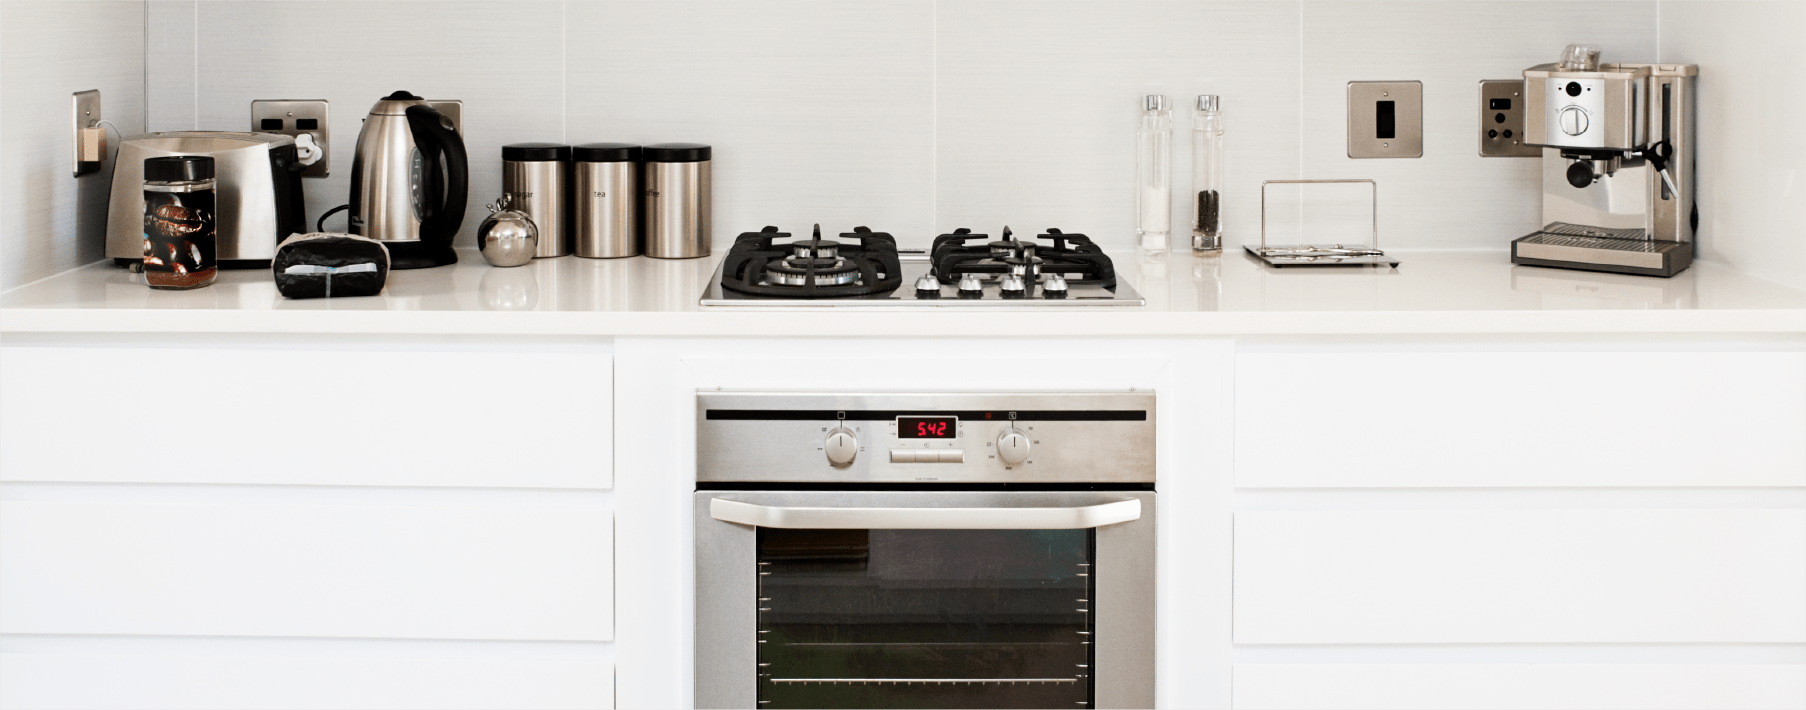 Image of a stove and various stainless steel appliances in a white kitchen